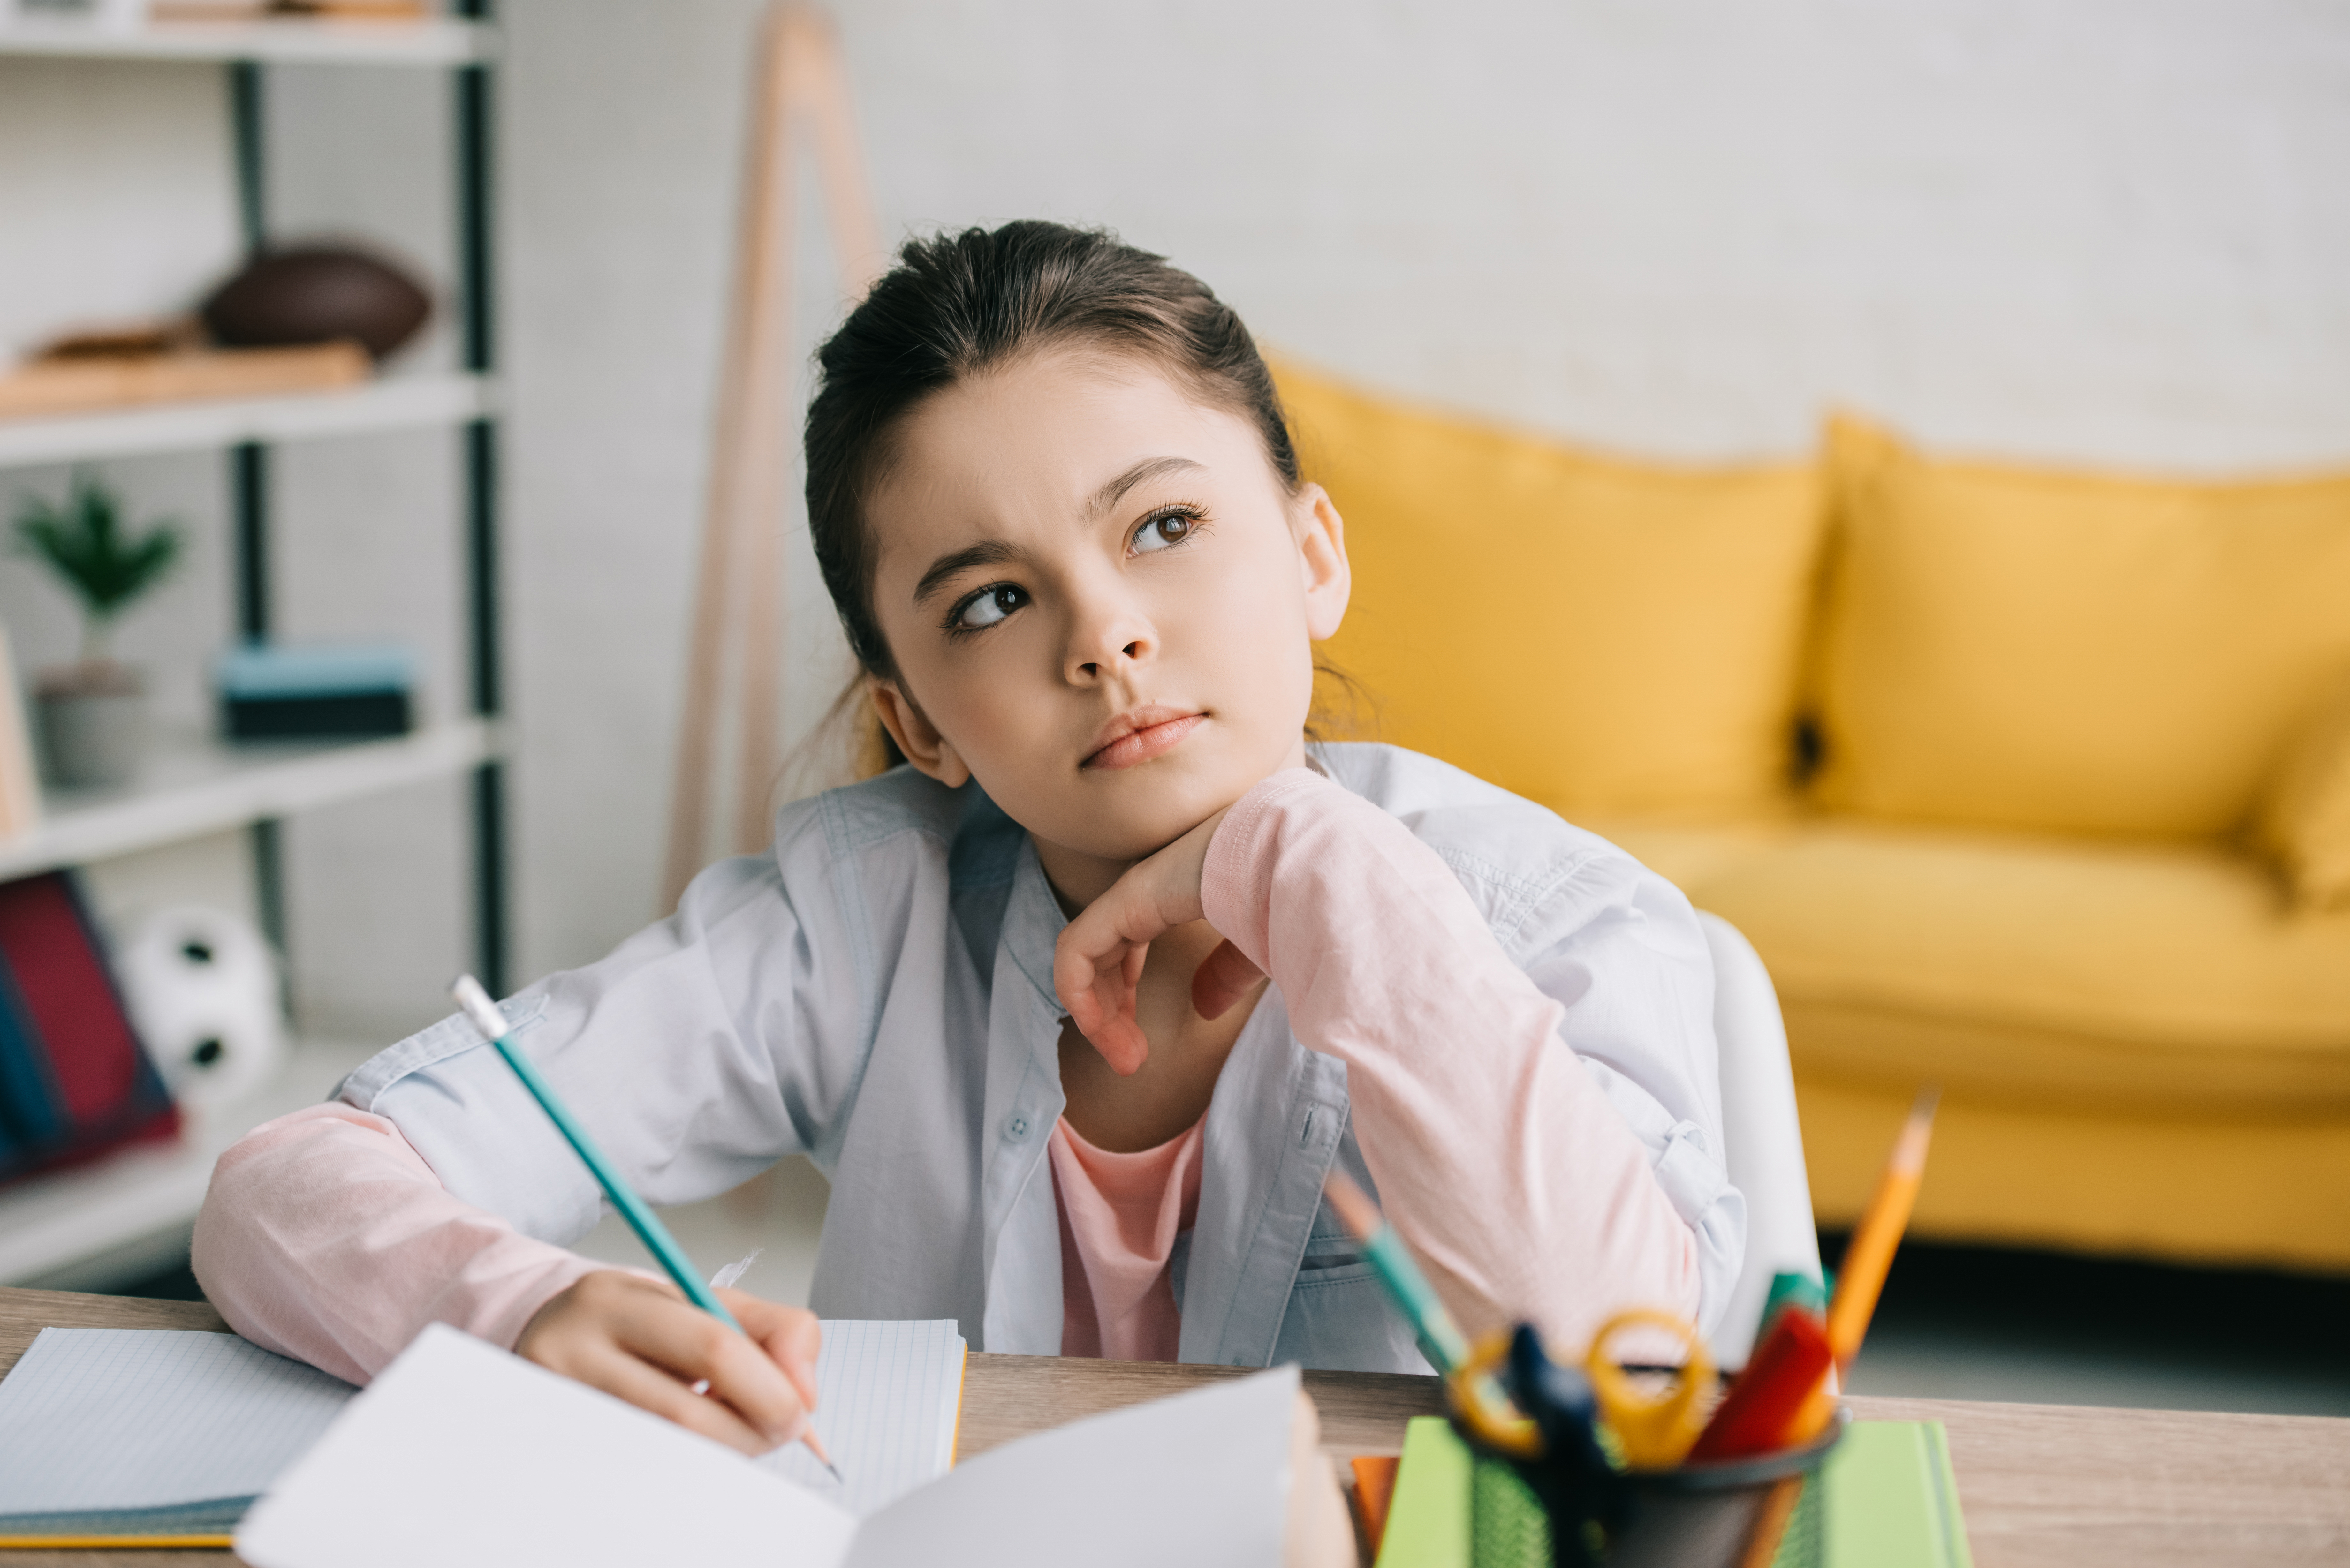 thoughtful child writing in notebook and looking away while doing schoolwork at home